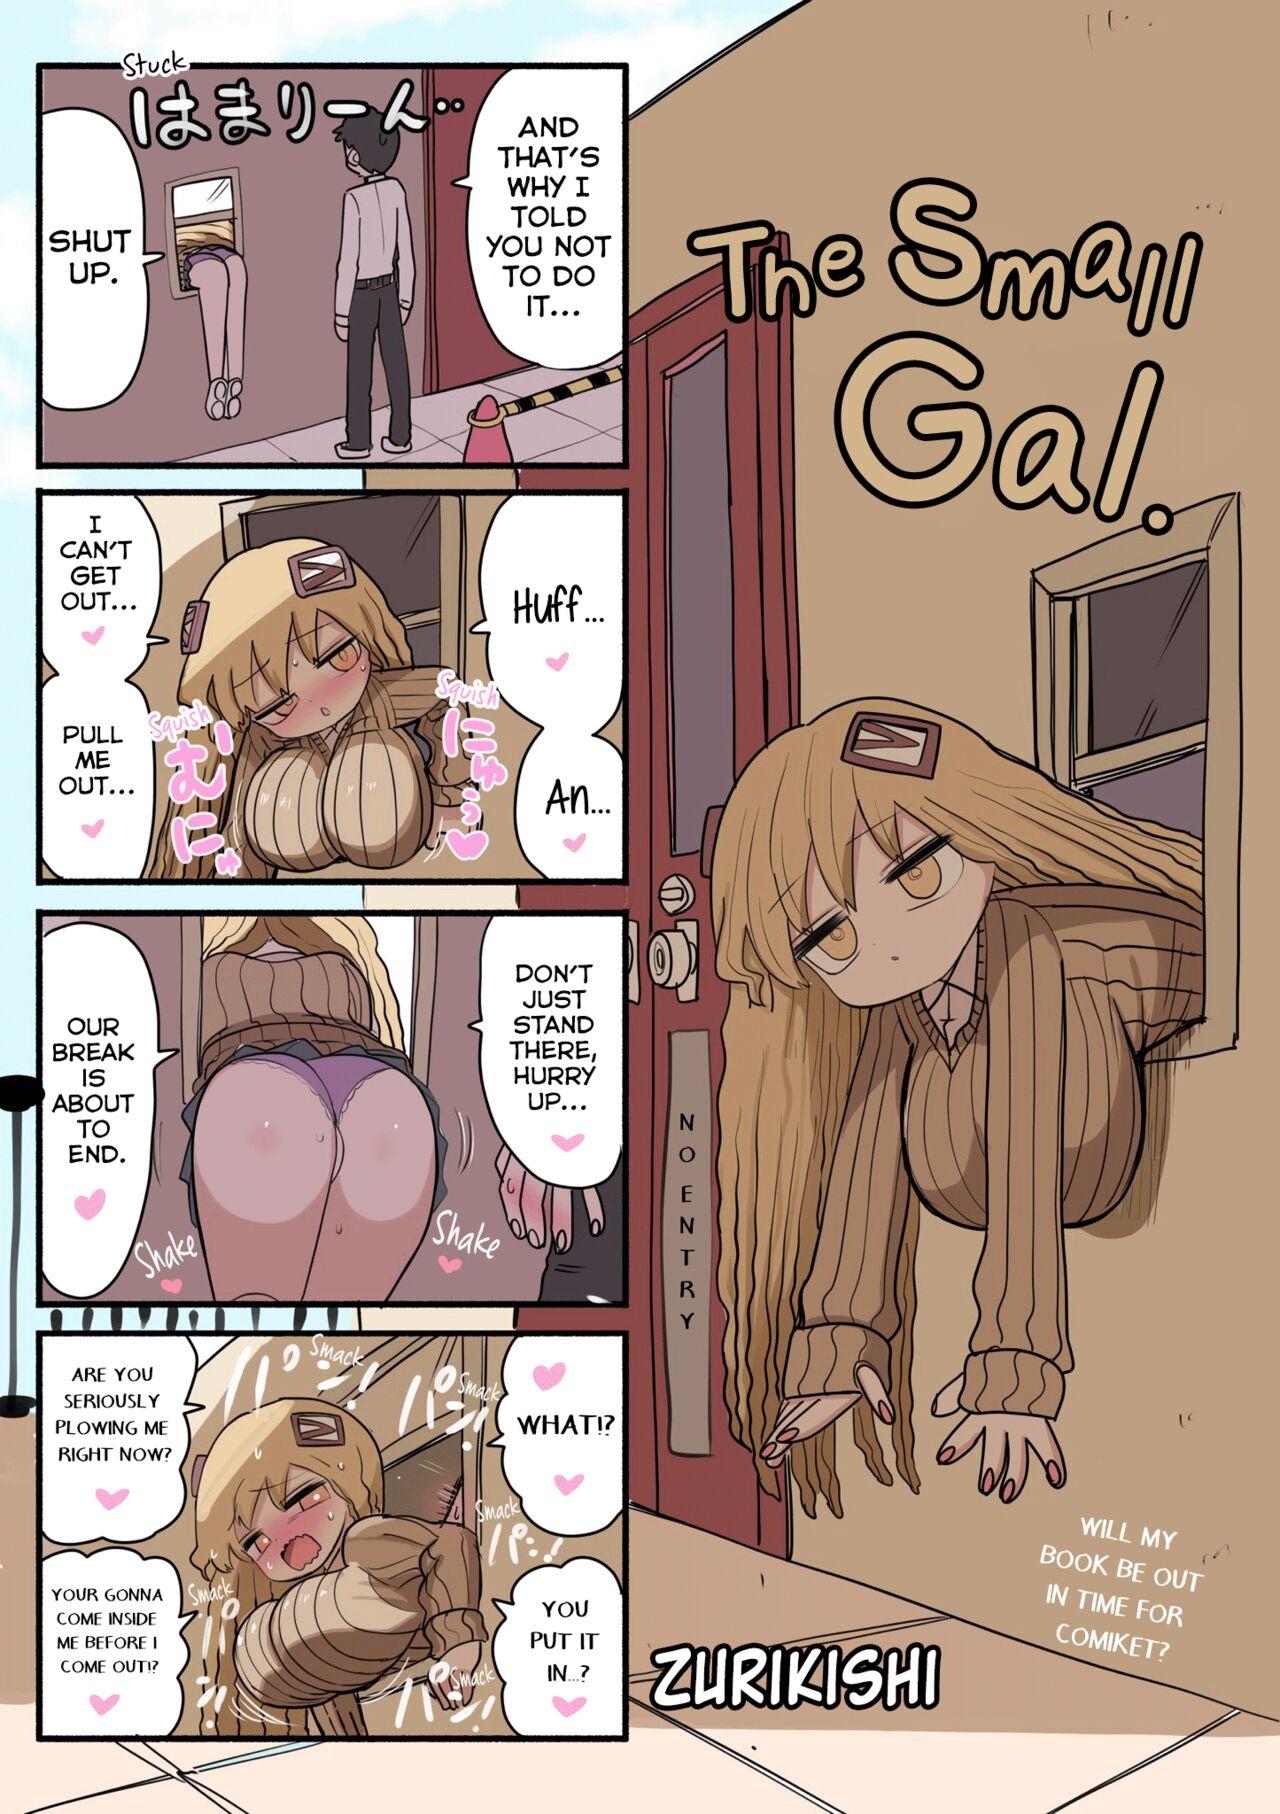 Chiisai Gal | The Small Gal 39